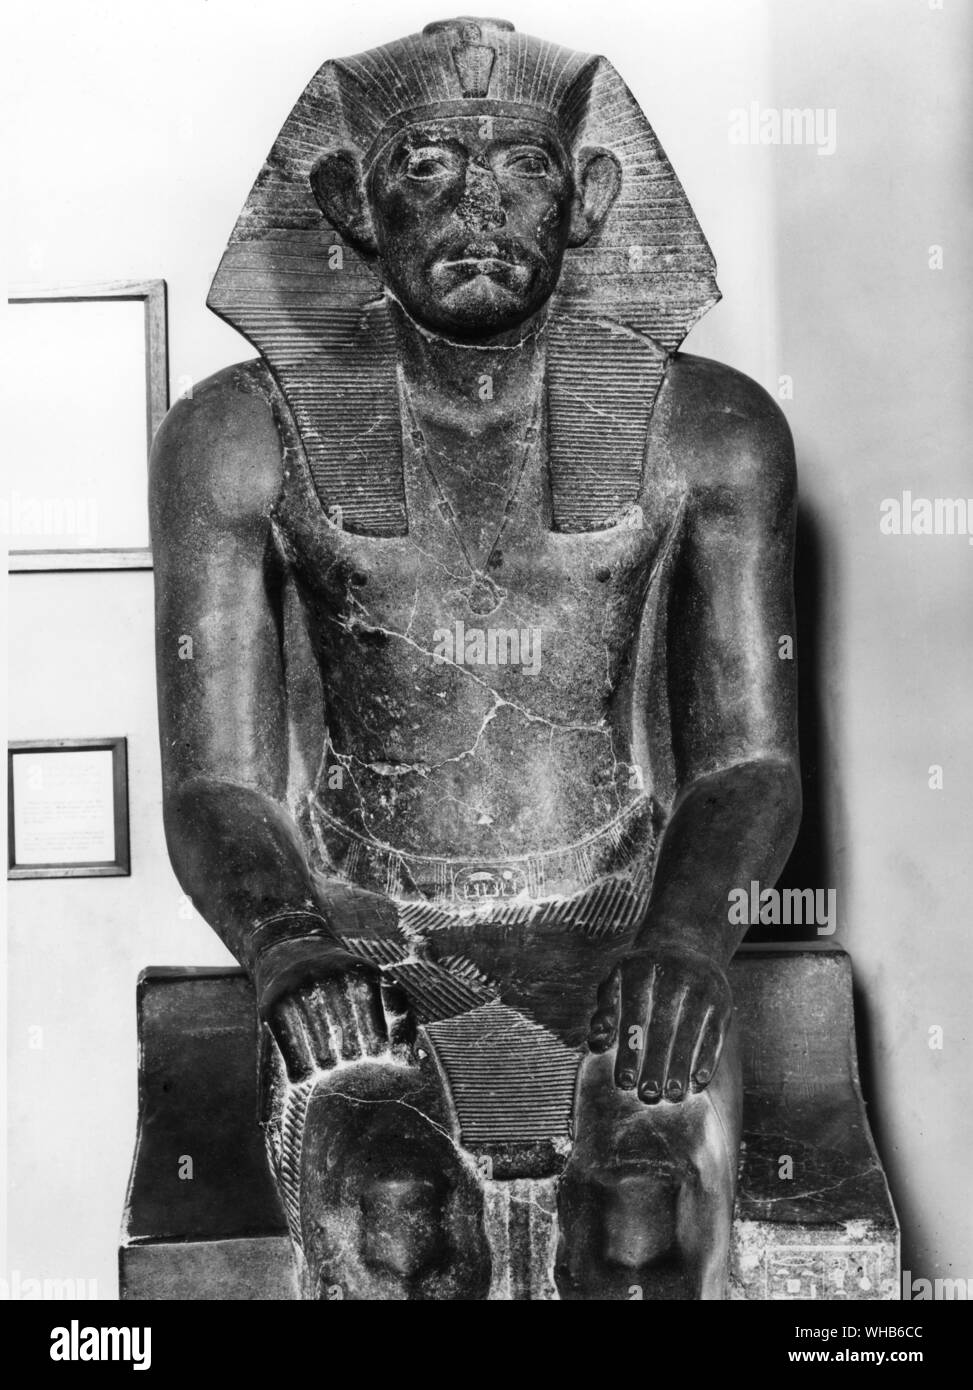 Sphinx of Senusret III Middle Kingdom XII Dynasty (1878-1843 BC ?) - Khakhaure Senusret III (also written as Senwosret III or Sesostris III) was a pharaoh of Egypt. He ruled from 1878 BC to 1839 BC, and was the fifth monarch of the Twelfth Dynasty of the Middle Kingdom. He was a Great Pharaoh of the twelfth Dynasty and is supposed to be the most powerful Egyptian ruler of this time. For this, he is regarded as one of the sources for the legend about Sesostris.. Stock Photo